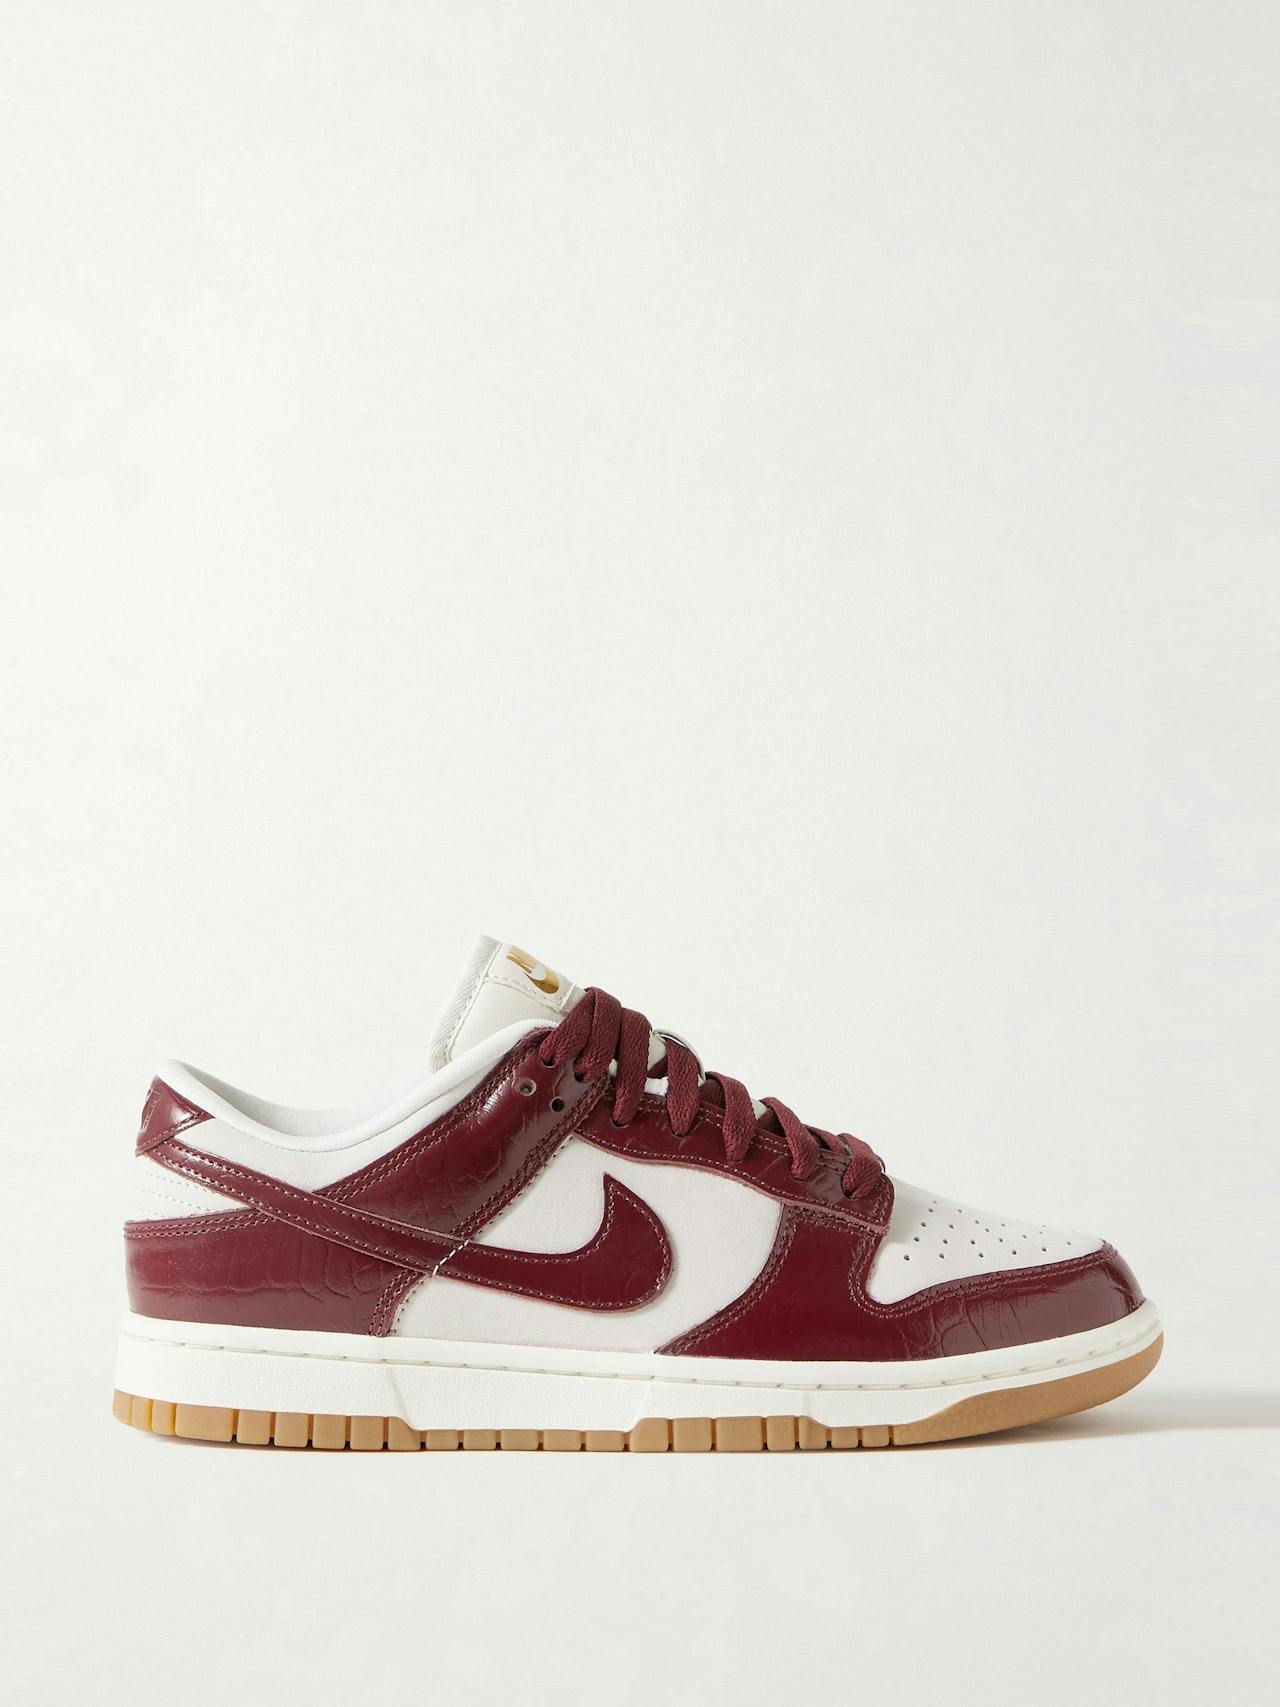 Dunk Low croc-effect leather-and suede sneakers